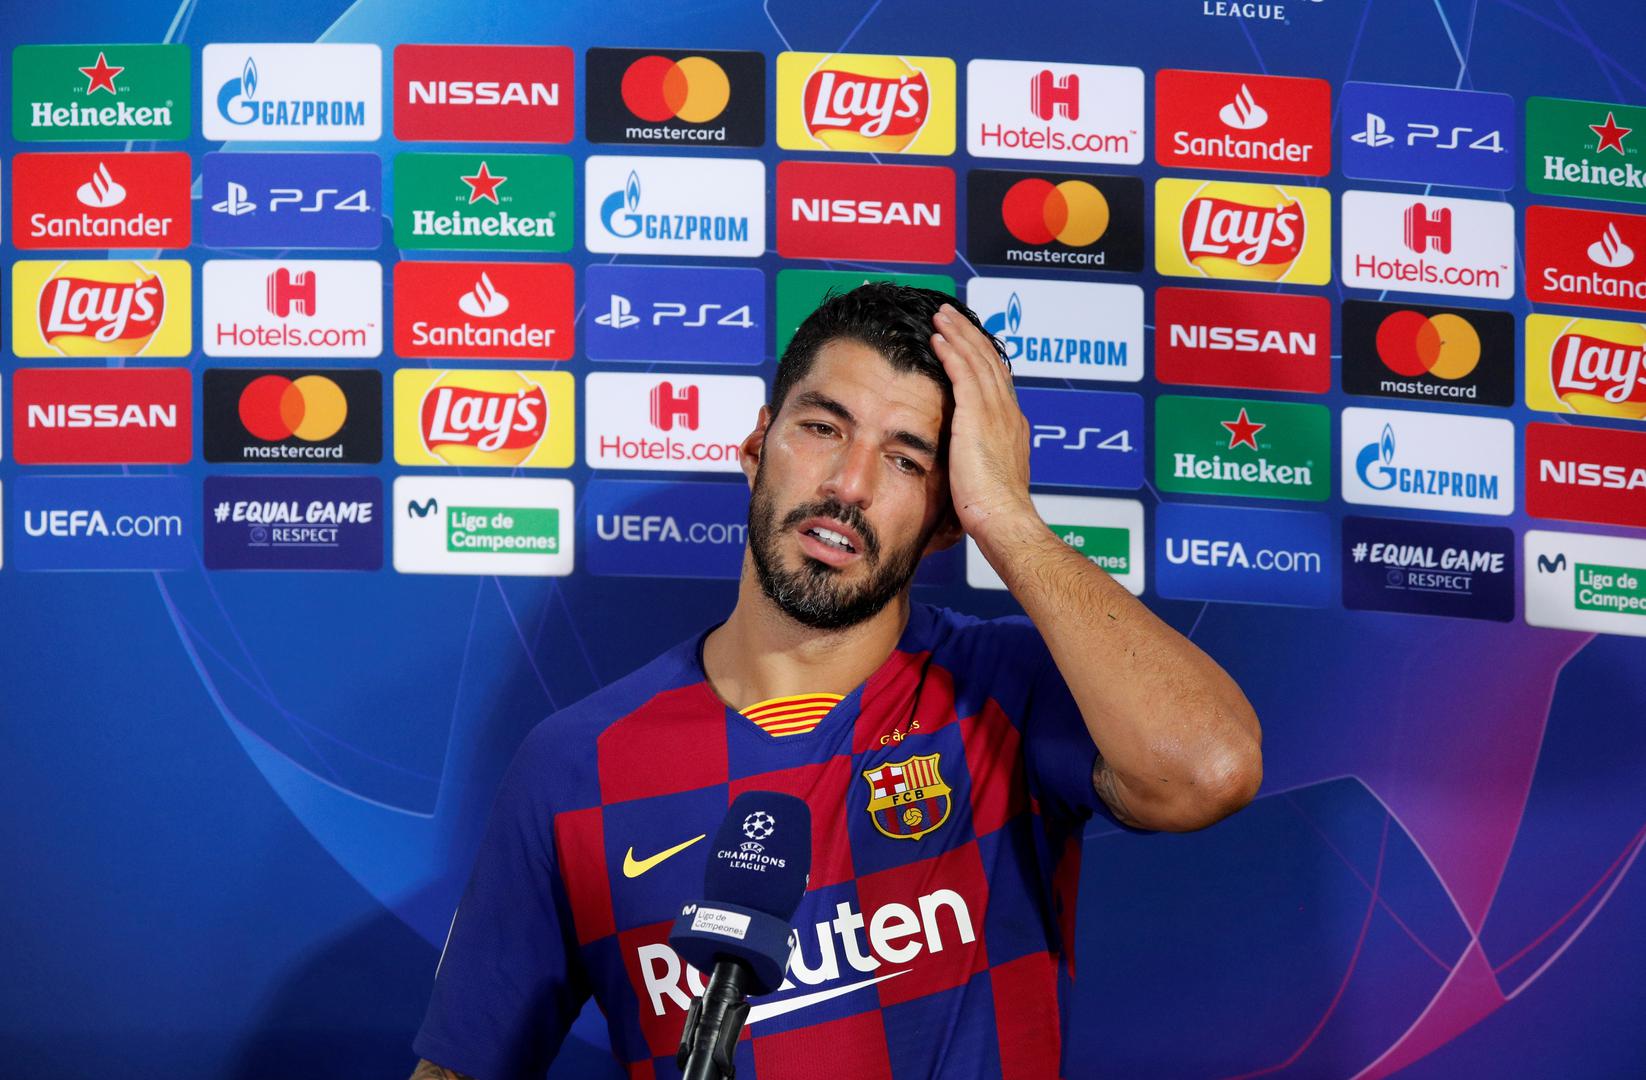 FILE PHOTO: Champions League - Round of 16 Second Leg - FC Barcelona v Napoli FILE PHOTO: Soccer Football - Champions League - Round of 16 Second Leg - FC Barcelona v Napoli - Camp Nou, Barcelona, Spain - August 8, 2020  Barcelona's Luis Suarez speaks to the media after the match, as play resumes behind closed doors following the outbreak of the coronavirus disease (COVID-19)  REUTERS/Albert Gea/File Photo ALBERT GEA